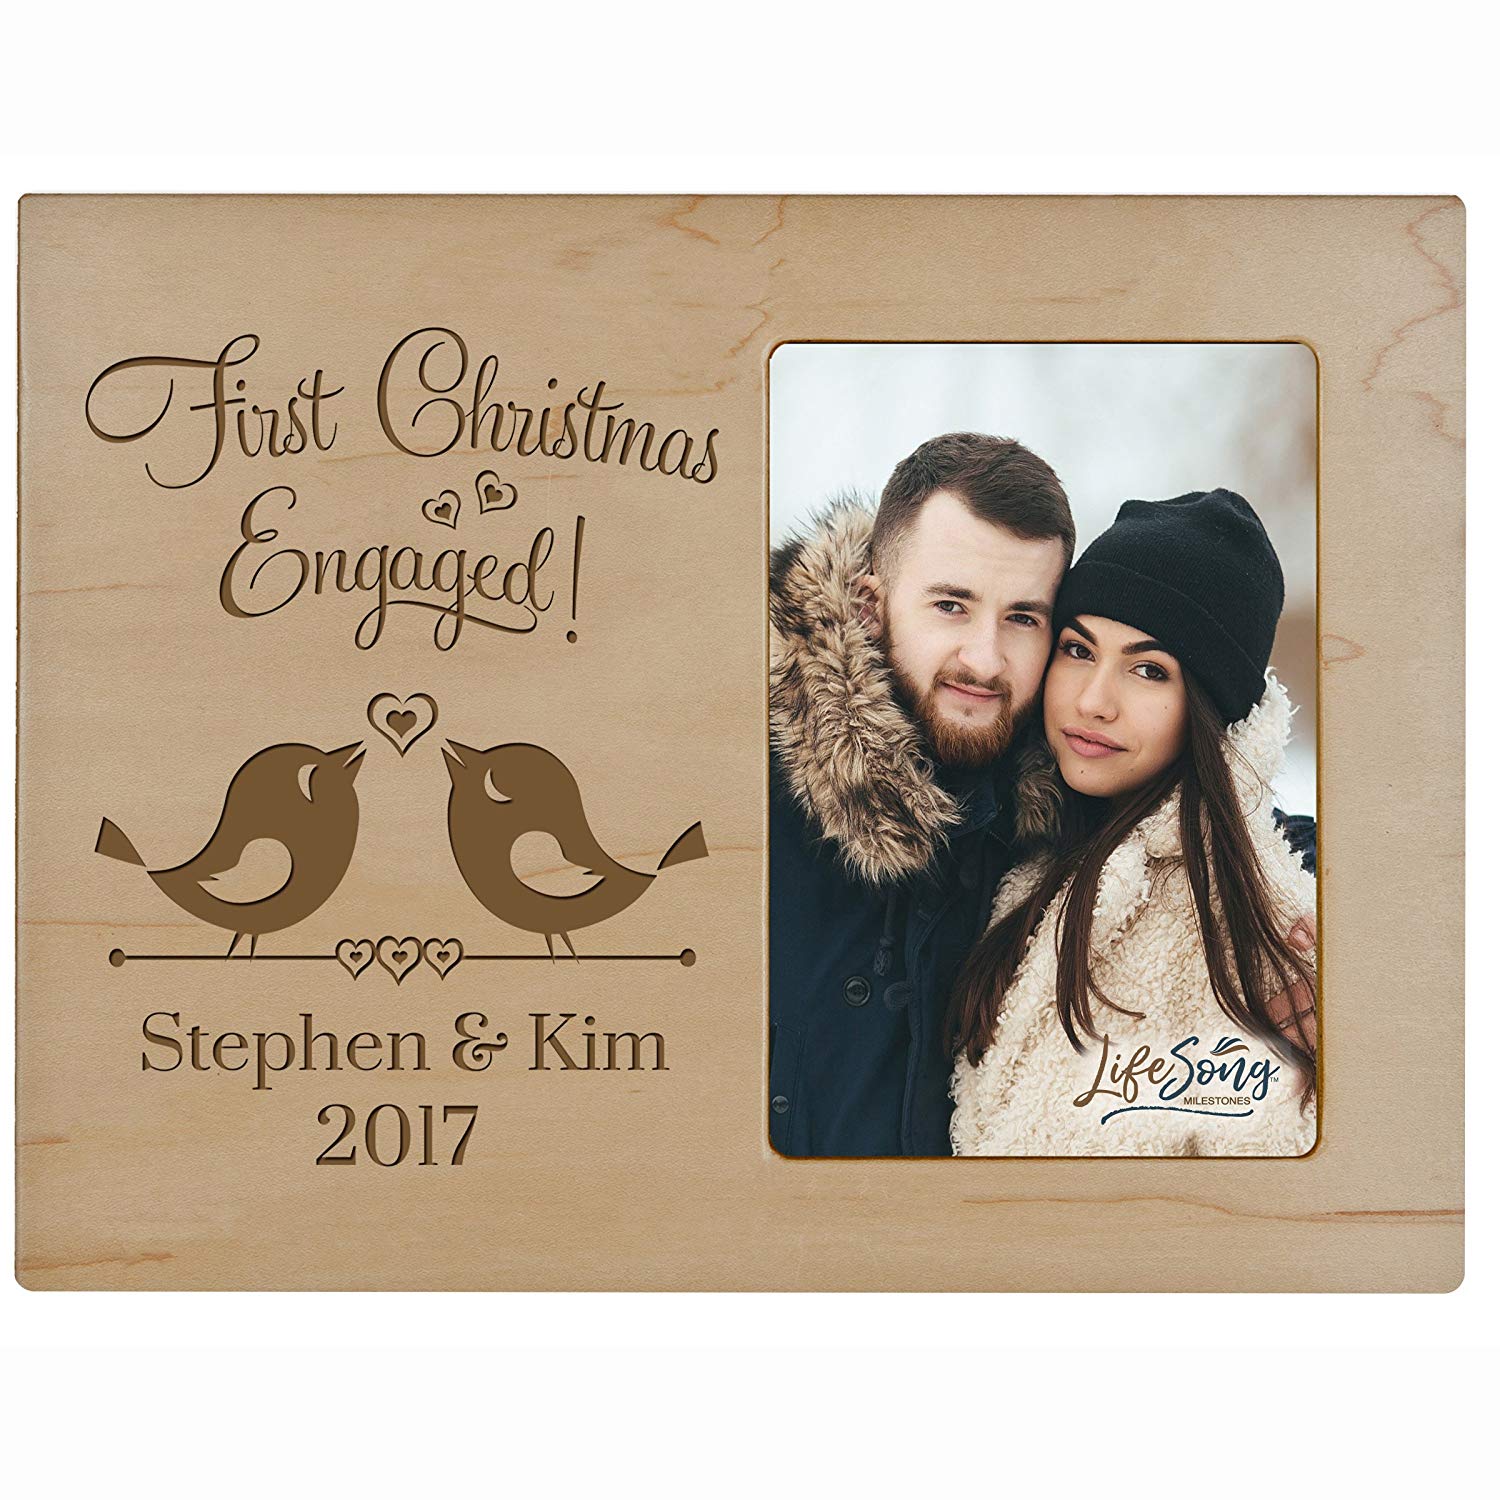 Personalized Home Christmas Bird Design Photo Frame Holds 4x6 Photograph - LifeSong Milestones